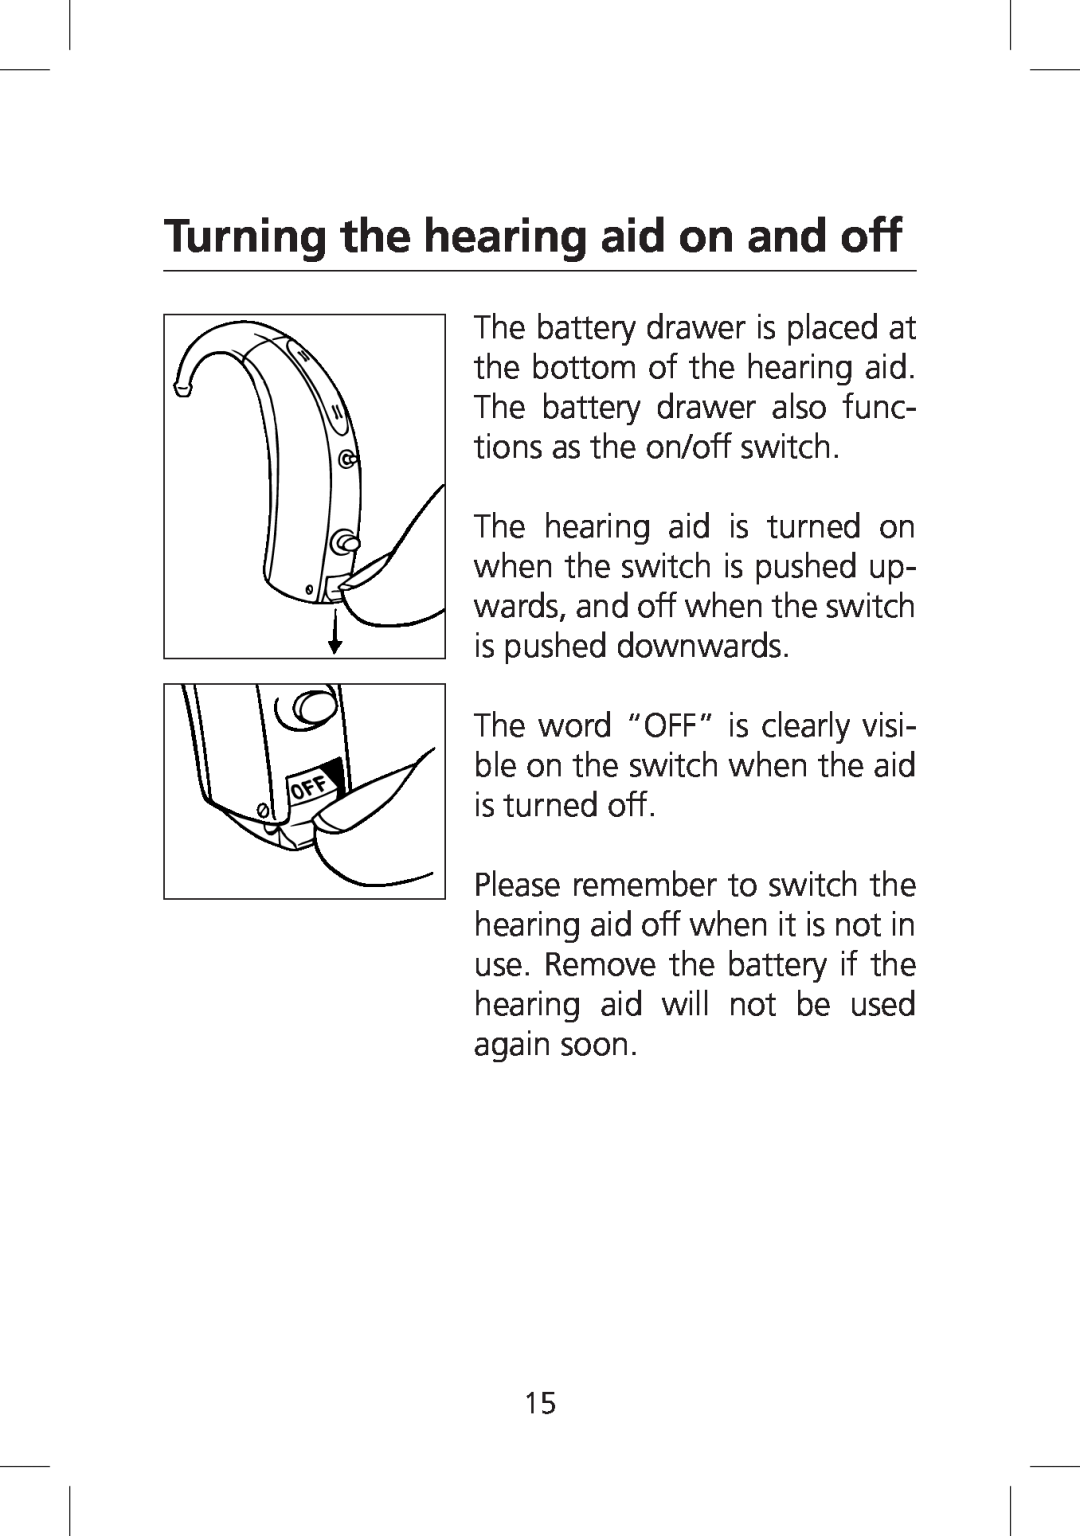 SV Sound SV-19 manual Turning the hearing aid on and off 